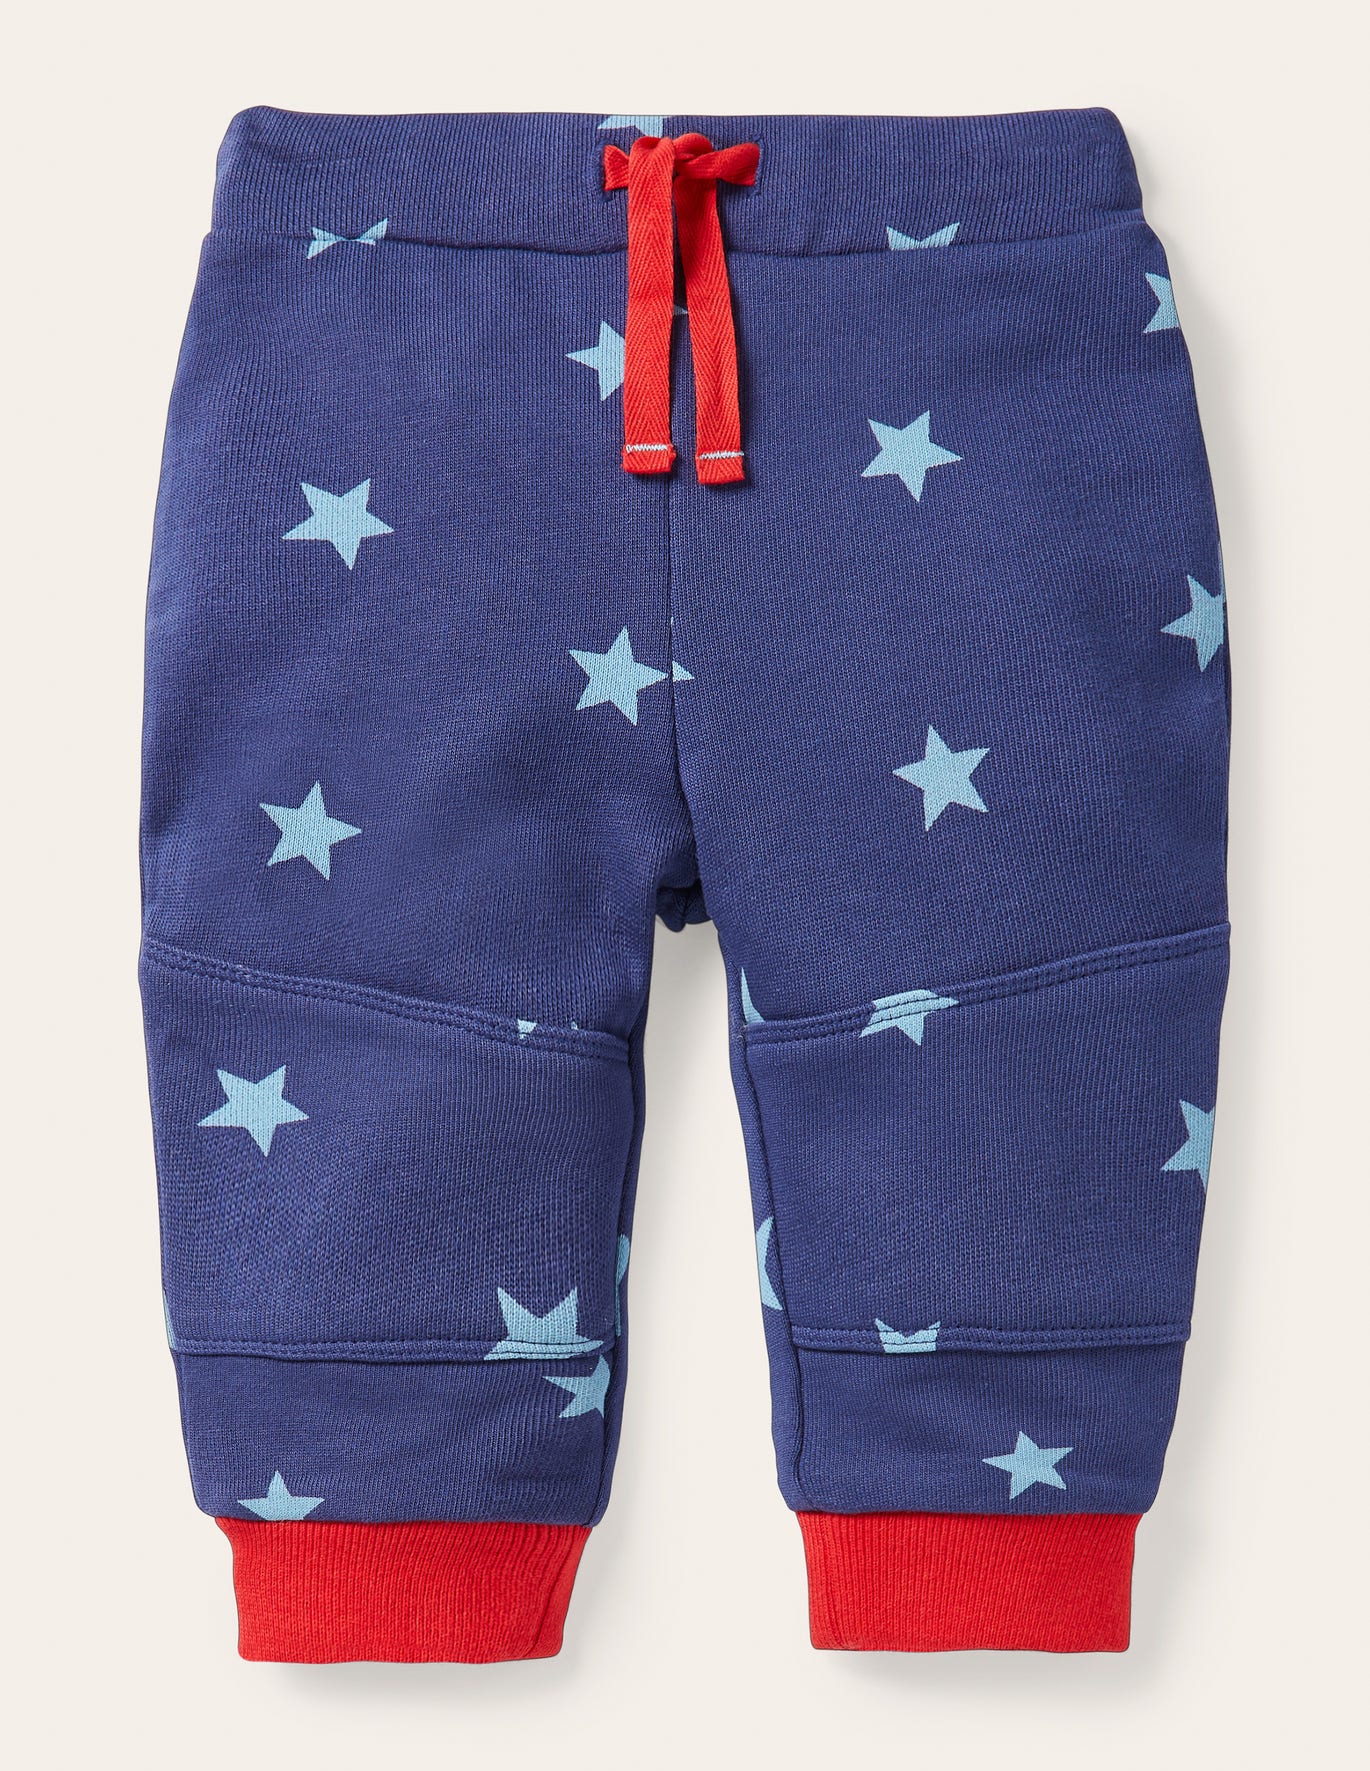 Boden Warrior Knee Jersey Bottoms - Starboard & Frosted Blue Stars